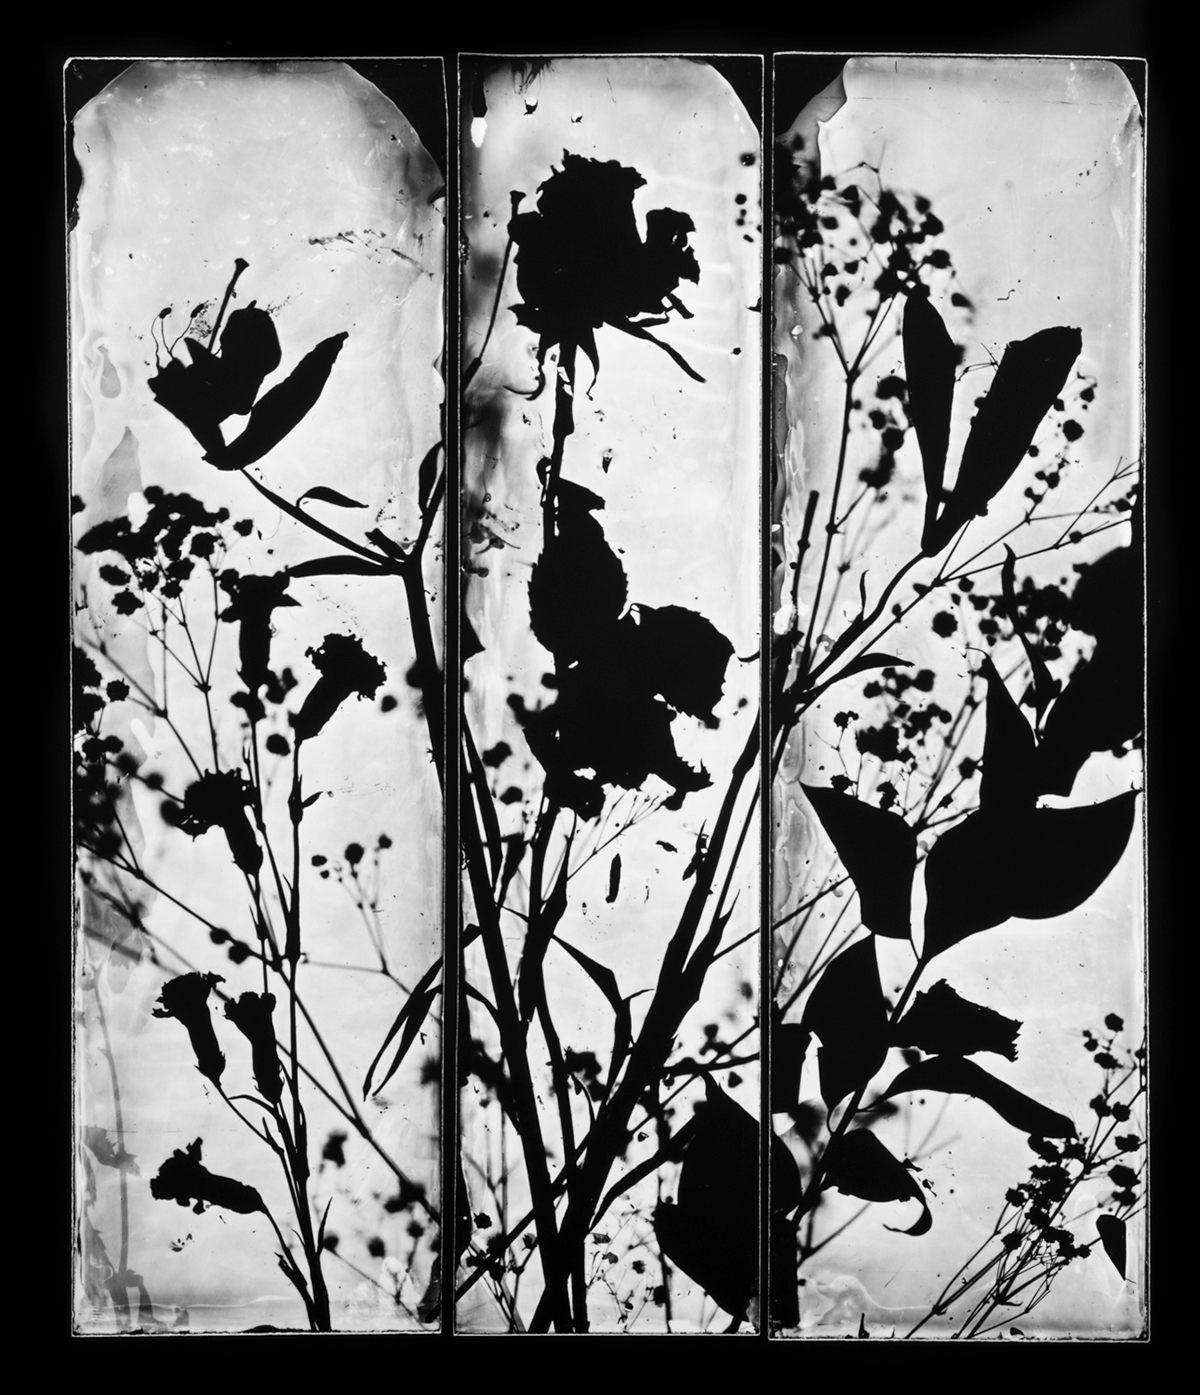 collodion wet plate wetplate Henrikson darkroom risd chaos contact print